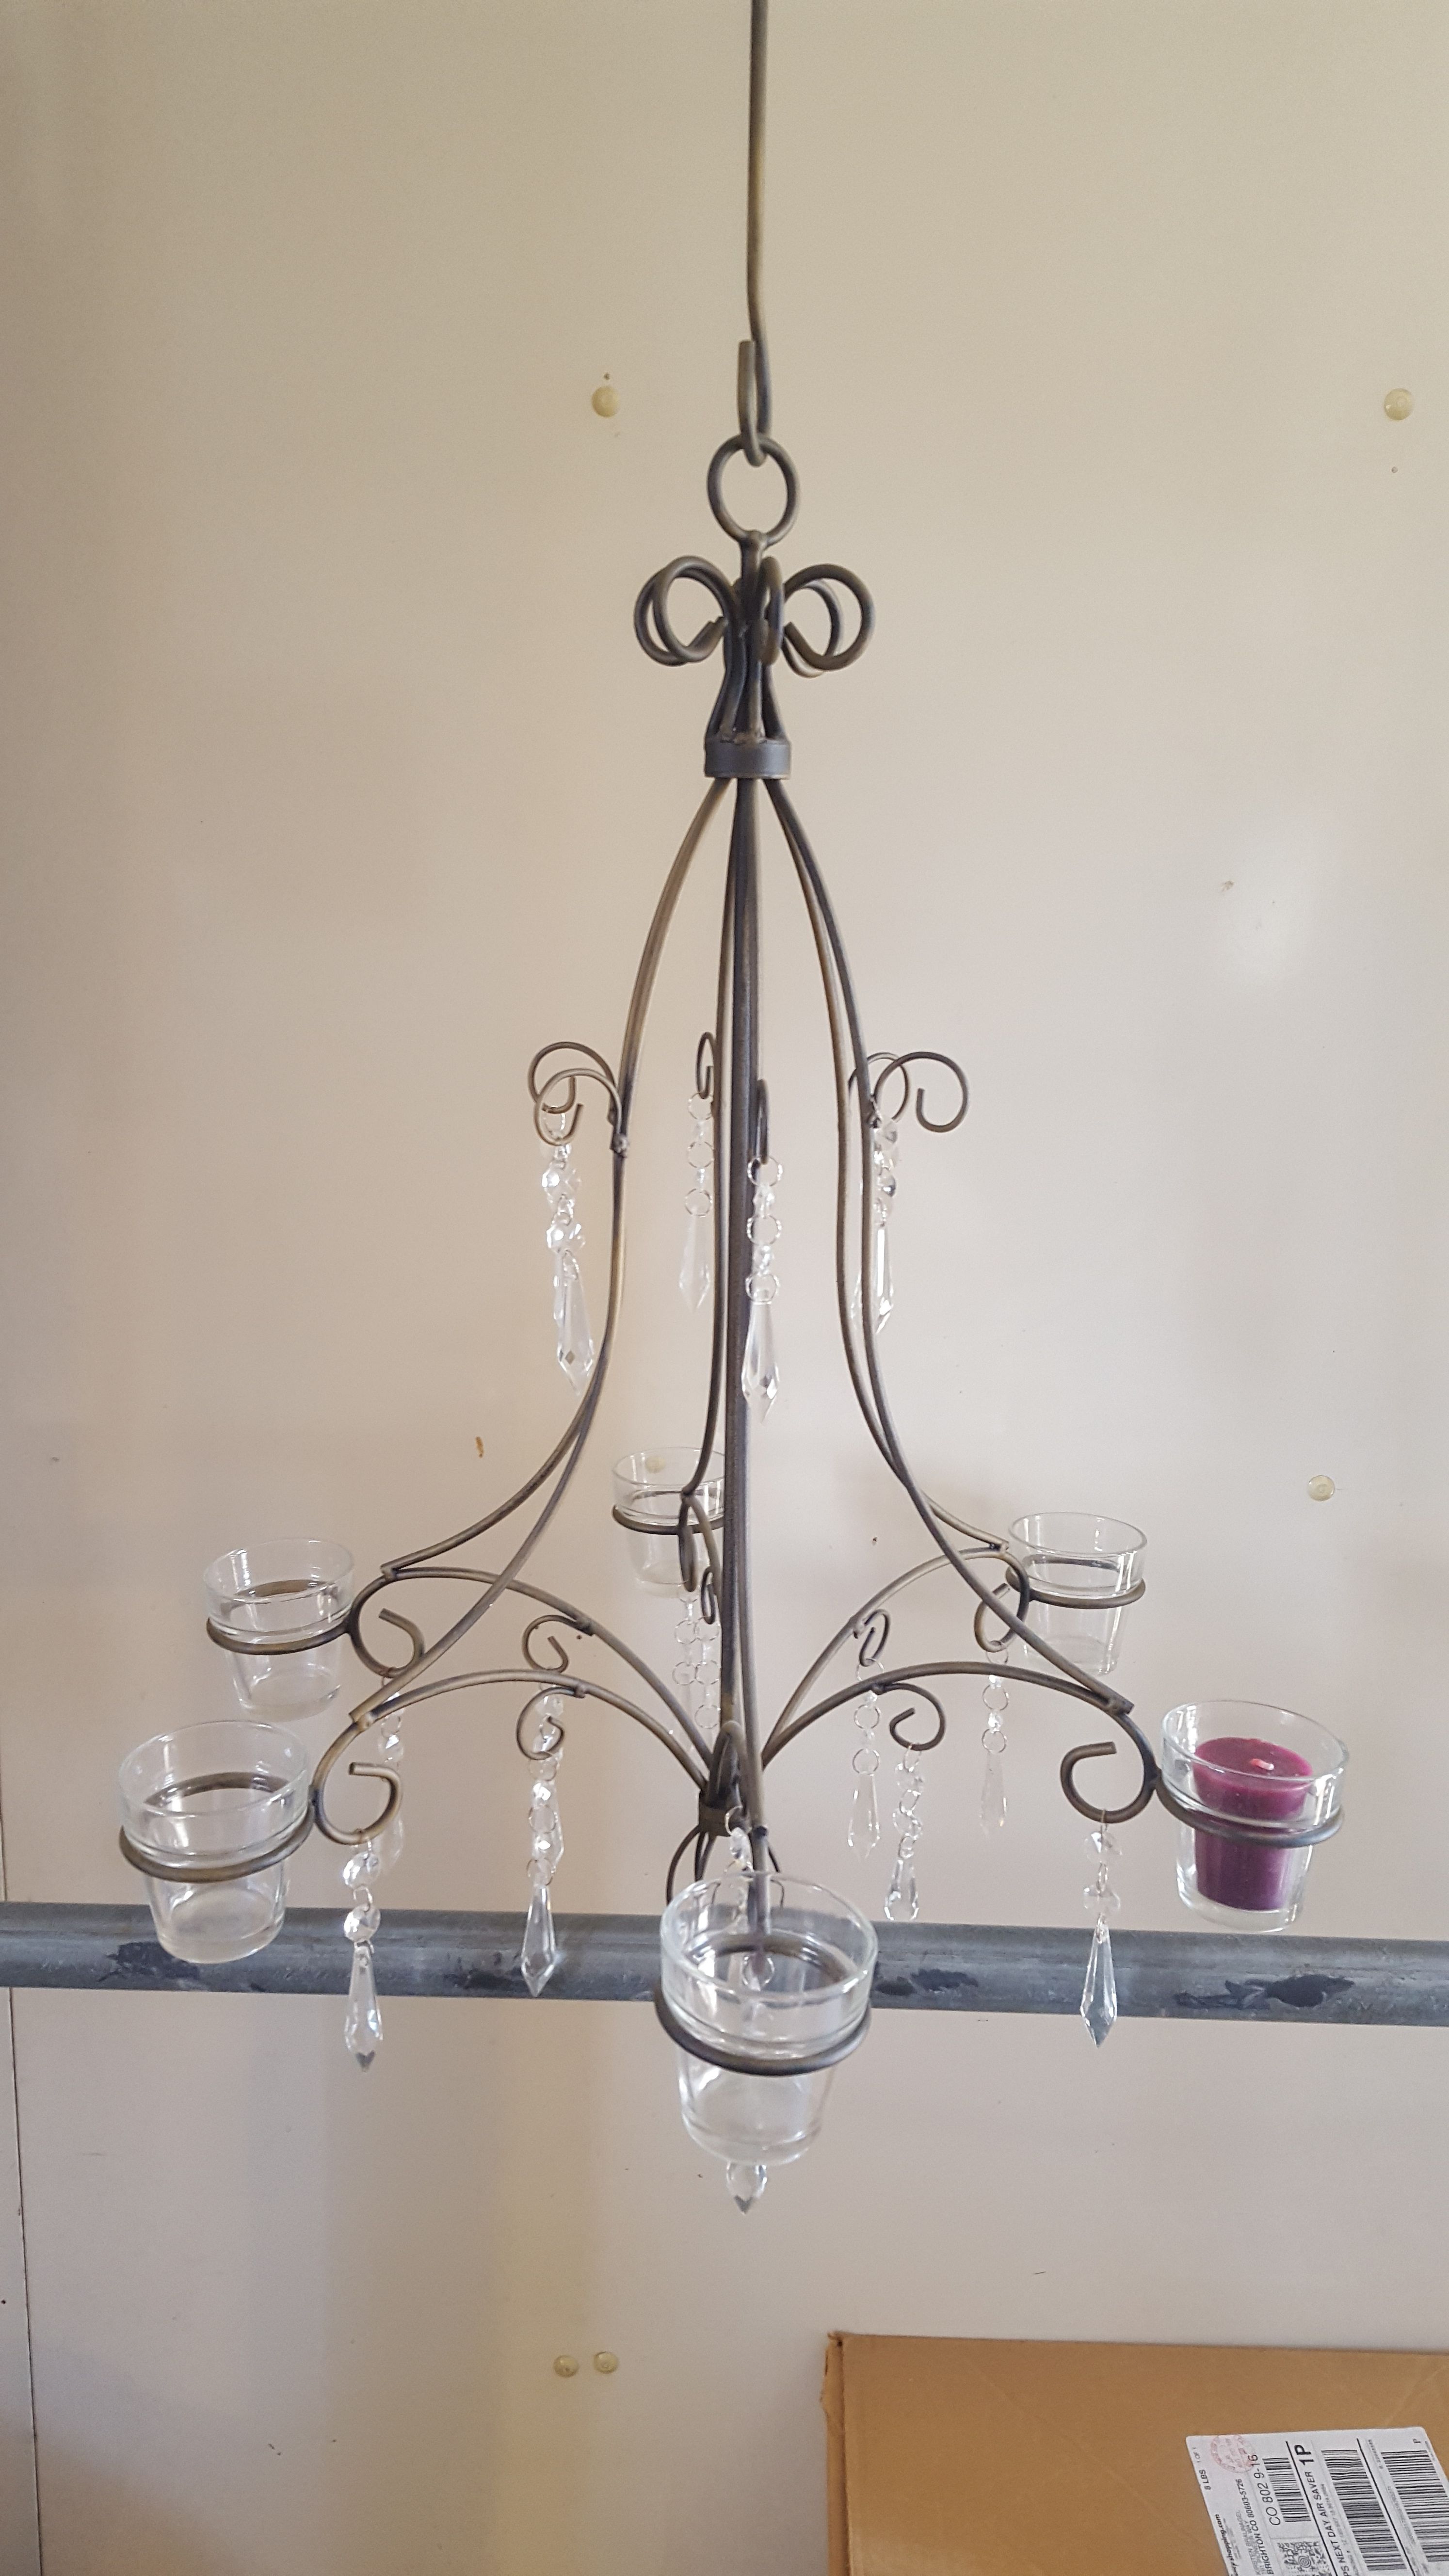 Unique vintage rod iron candle chandelier can hold 6 candles. Like new been in storage. Sell for over 100 asking 30